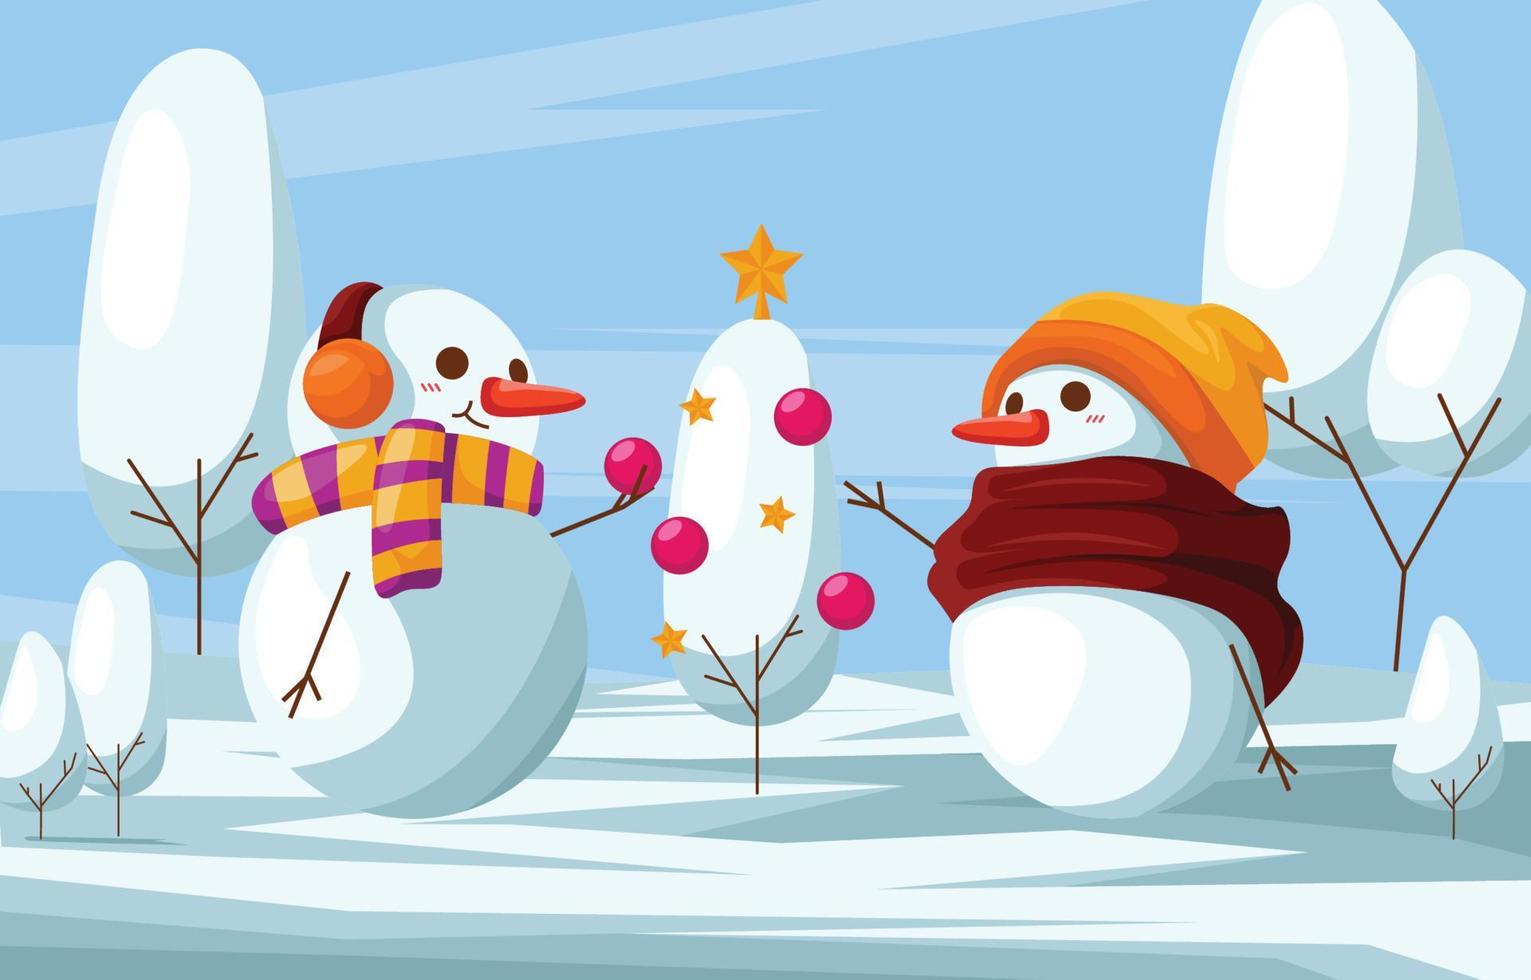 Snowman with Christmas Tree Illustrative Background vector